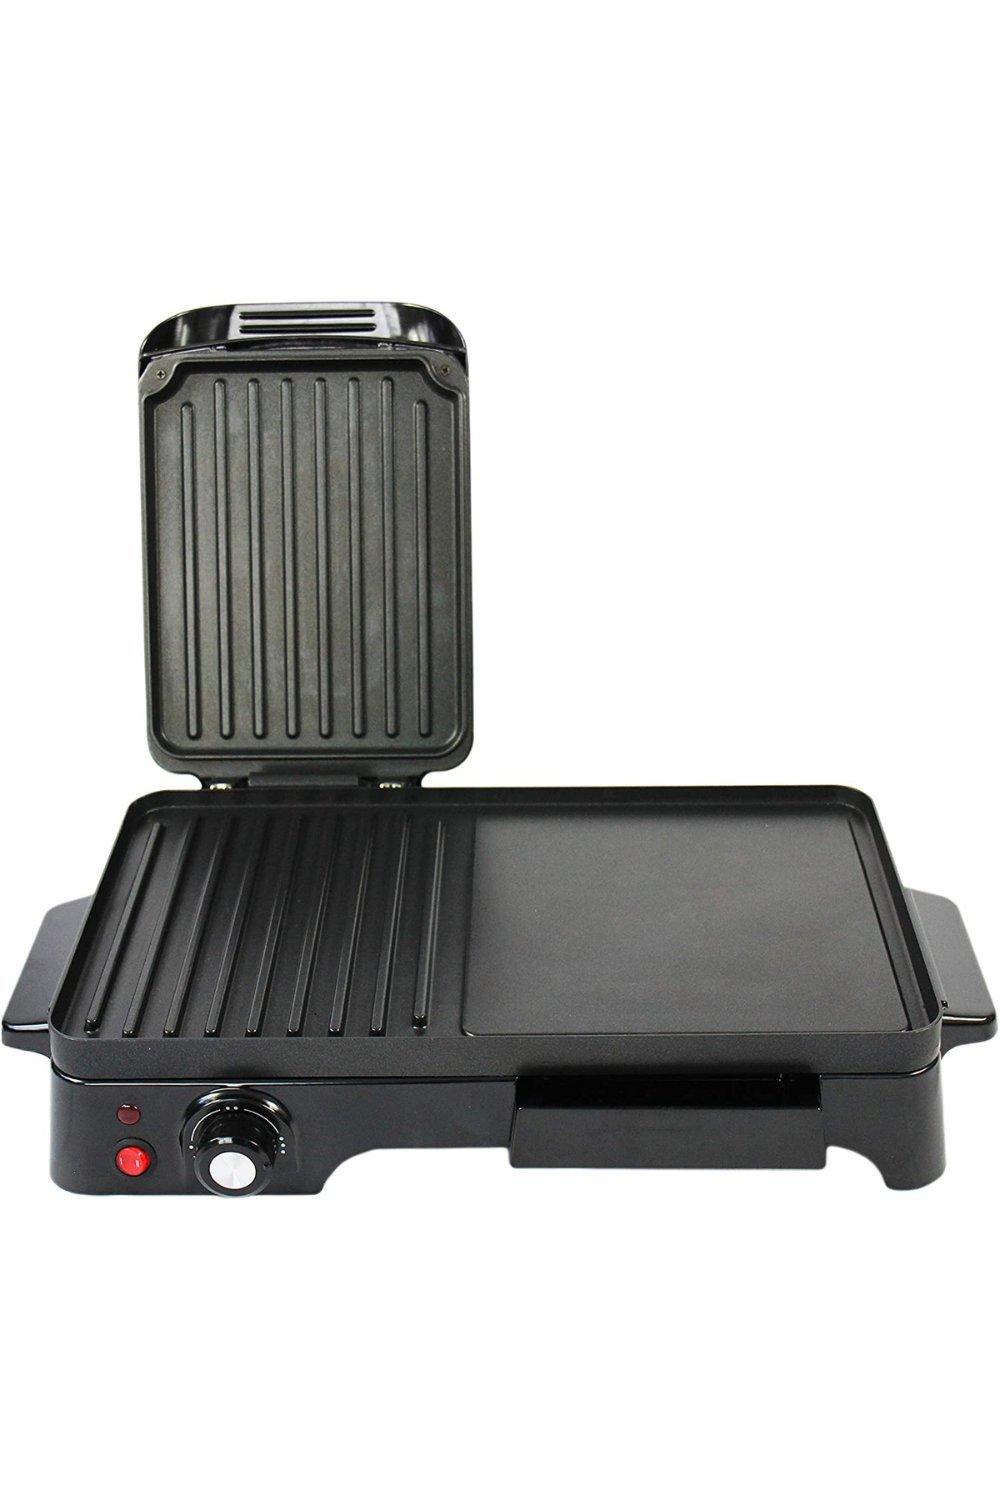 Schallen Electic Black Table Top 2 in 1 Versatile Adjustable Temperature Grill Griddle and Hot Plate Cooking Grilling Machine|black